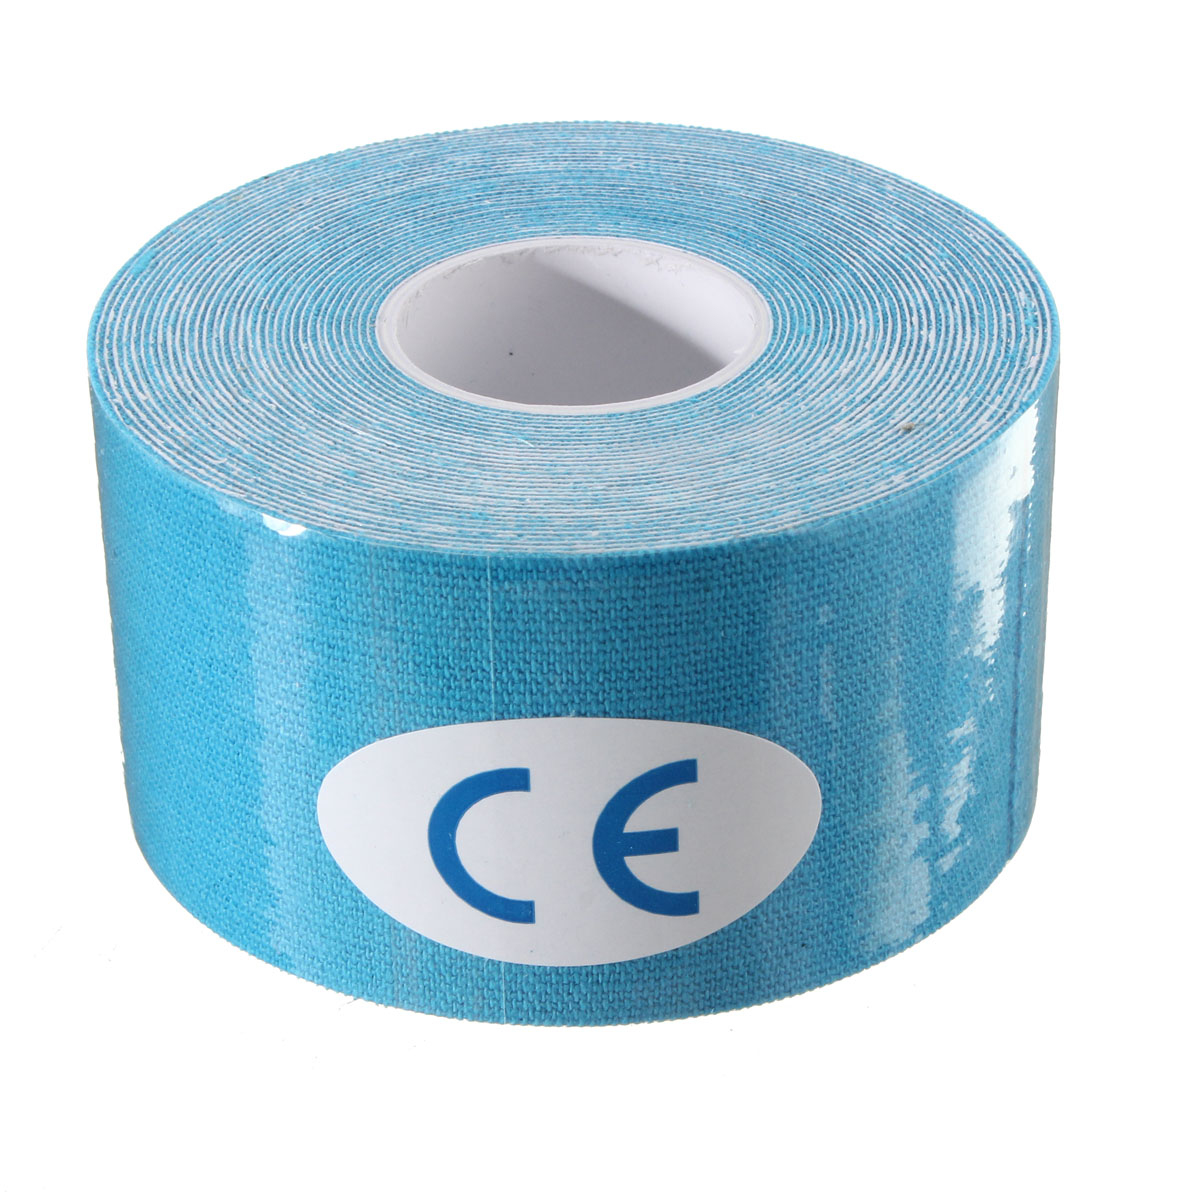 1pc-5m-Self-adhesiv-Elastic-Sport-Muscle-Sport-Tape-Bandage-Physio-Strain-Support-Pain-Relief-Roll-1123772